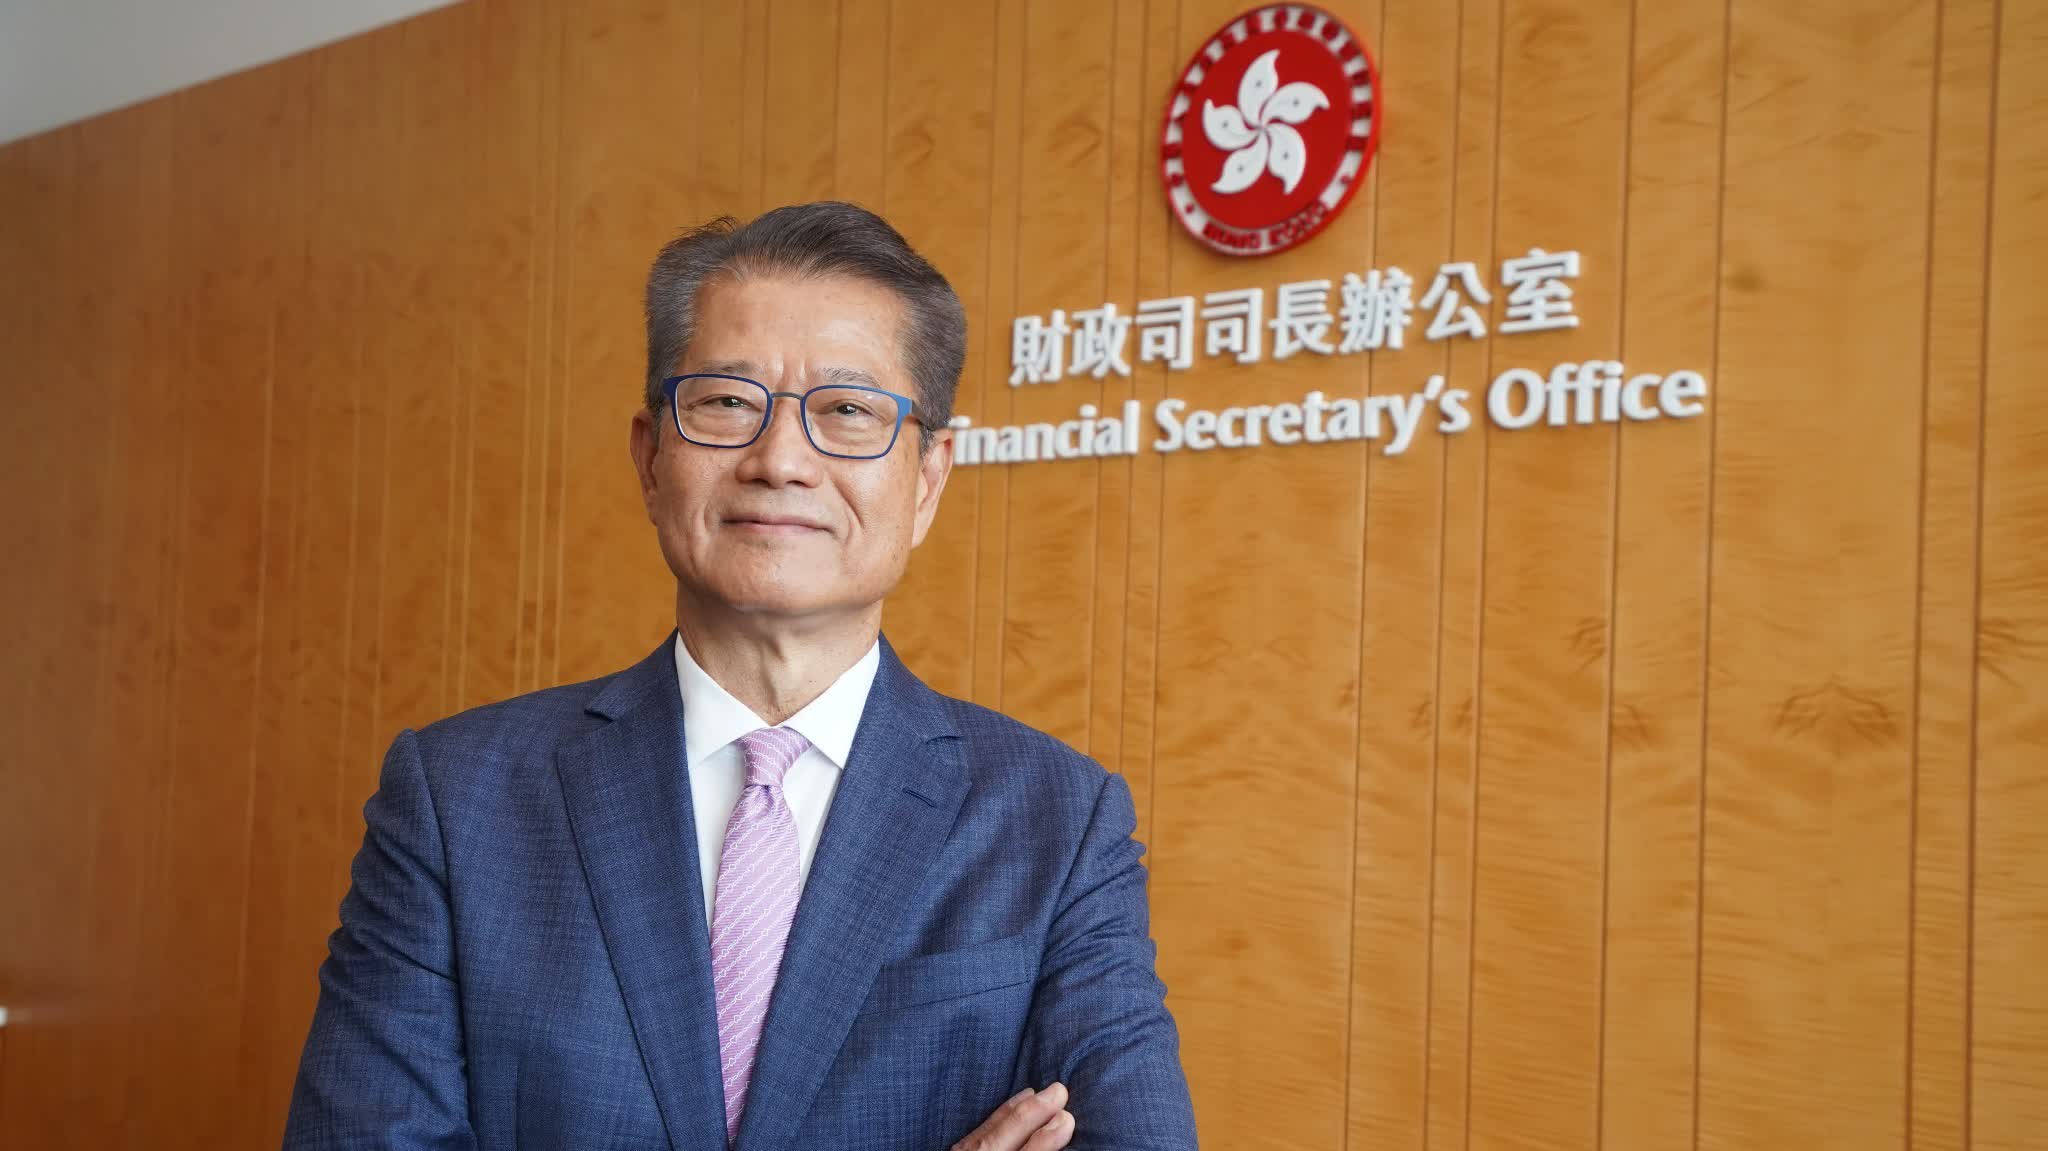 Paul Chan announces reappointment of Chief Executive of HKMA